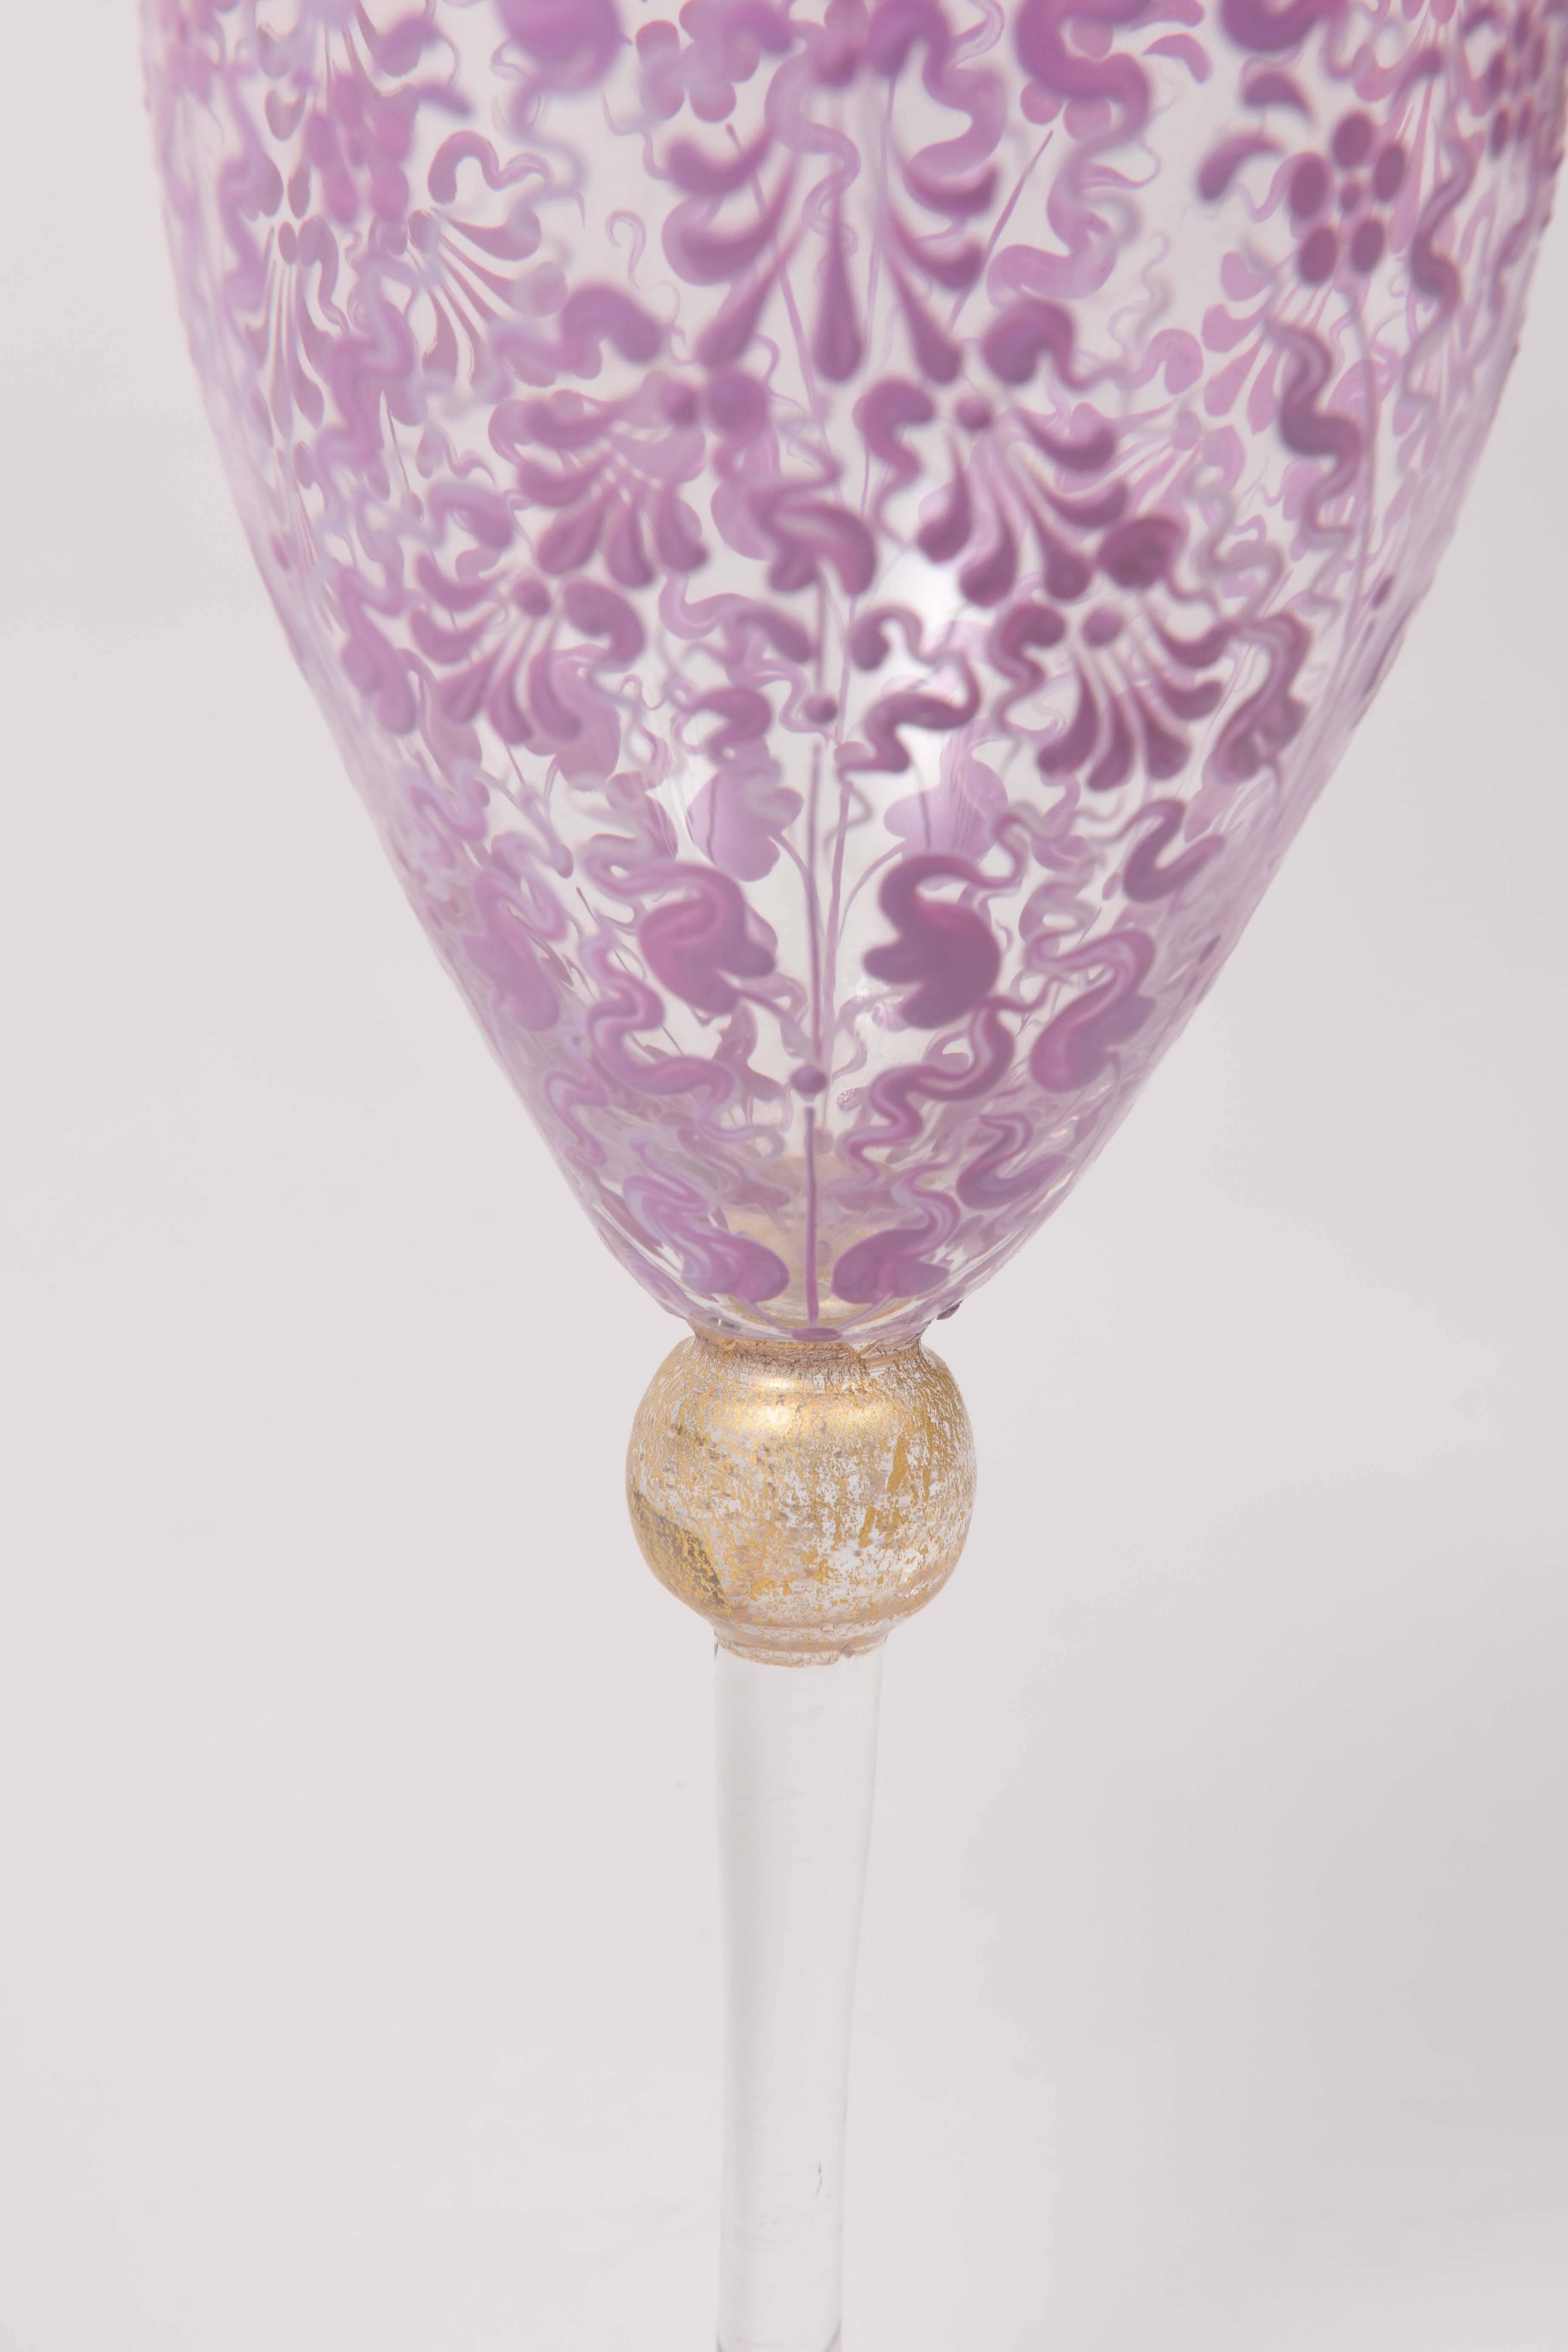 Hand-Crafted 10 Vintage Venetian Pink Gilt Wine Glasses, Hand-Painted with 24-Karat Gold